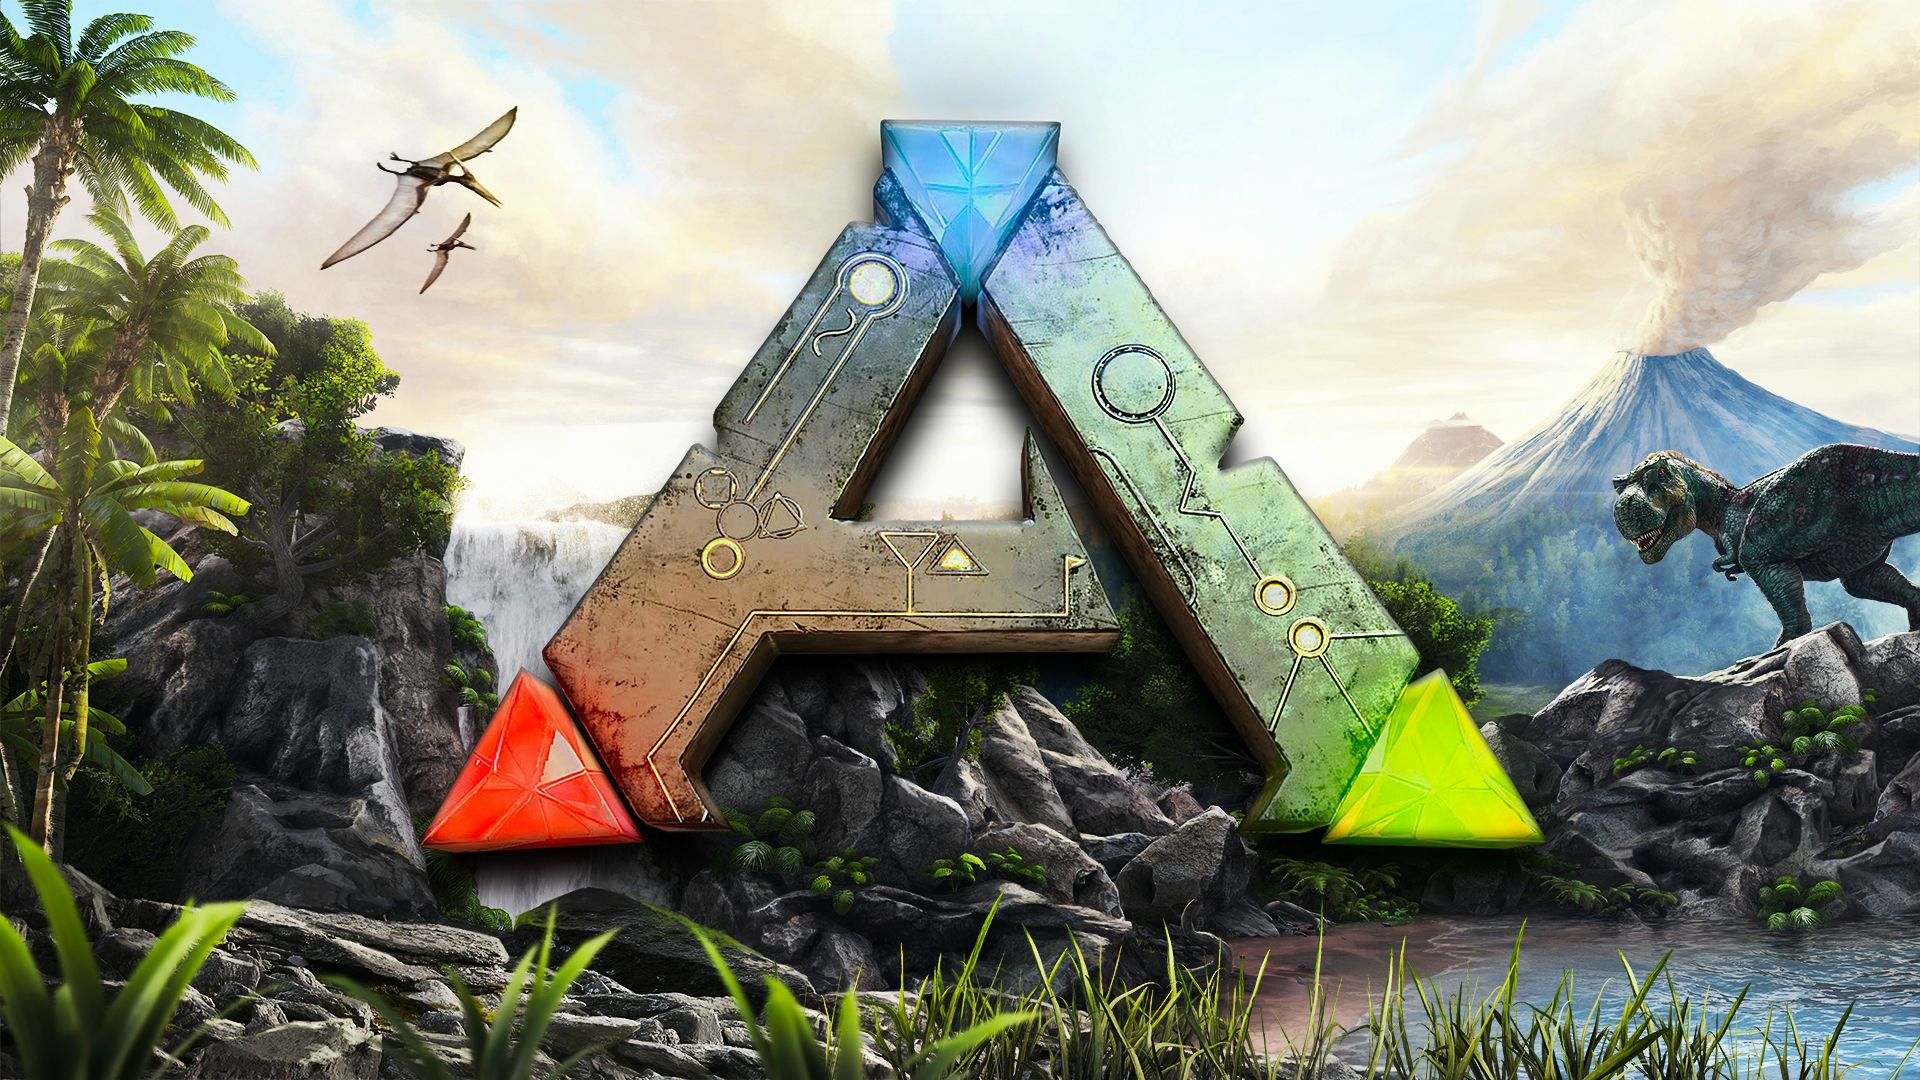 ARK: Survival Evolved Wallpapers, Pictures, Images